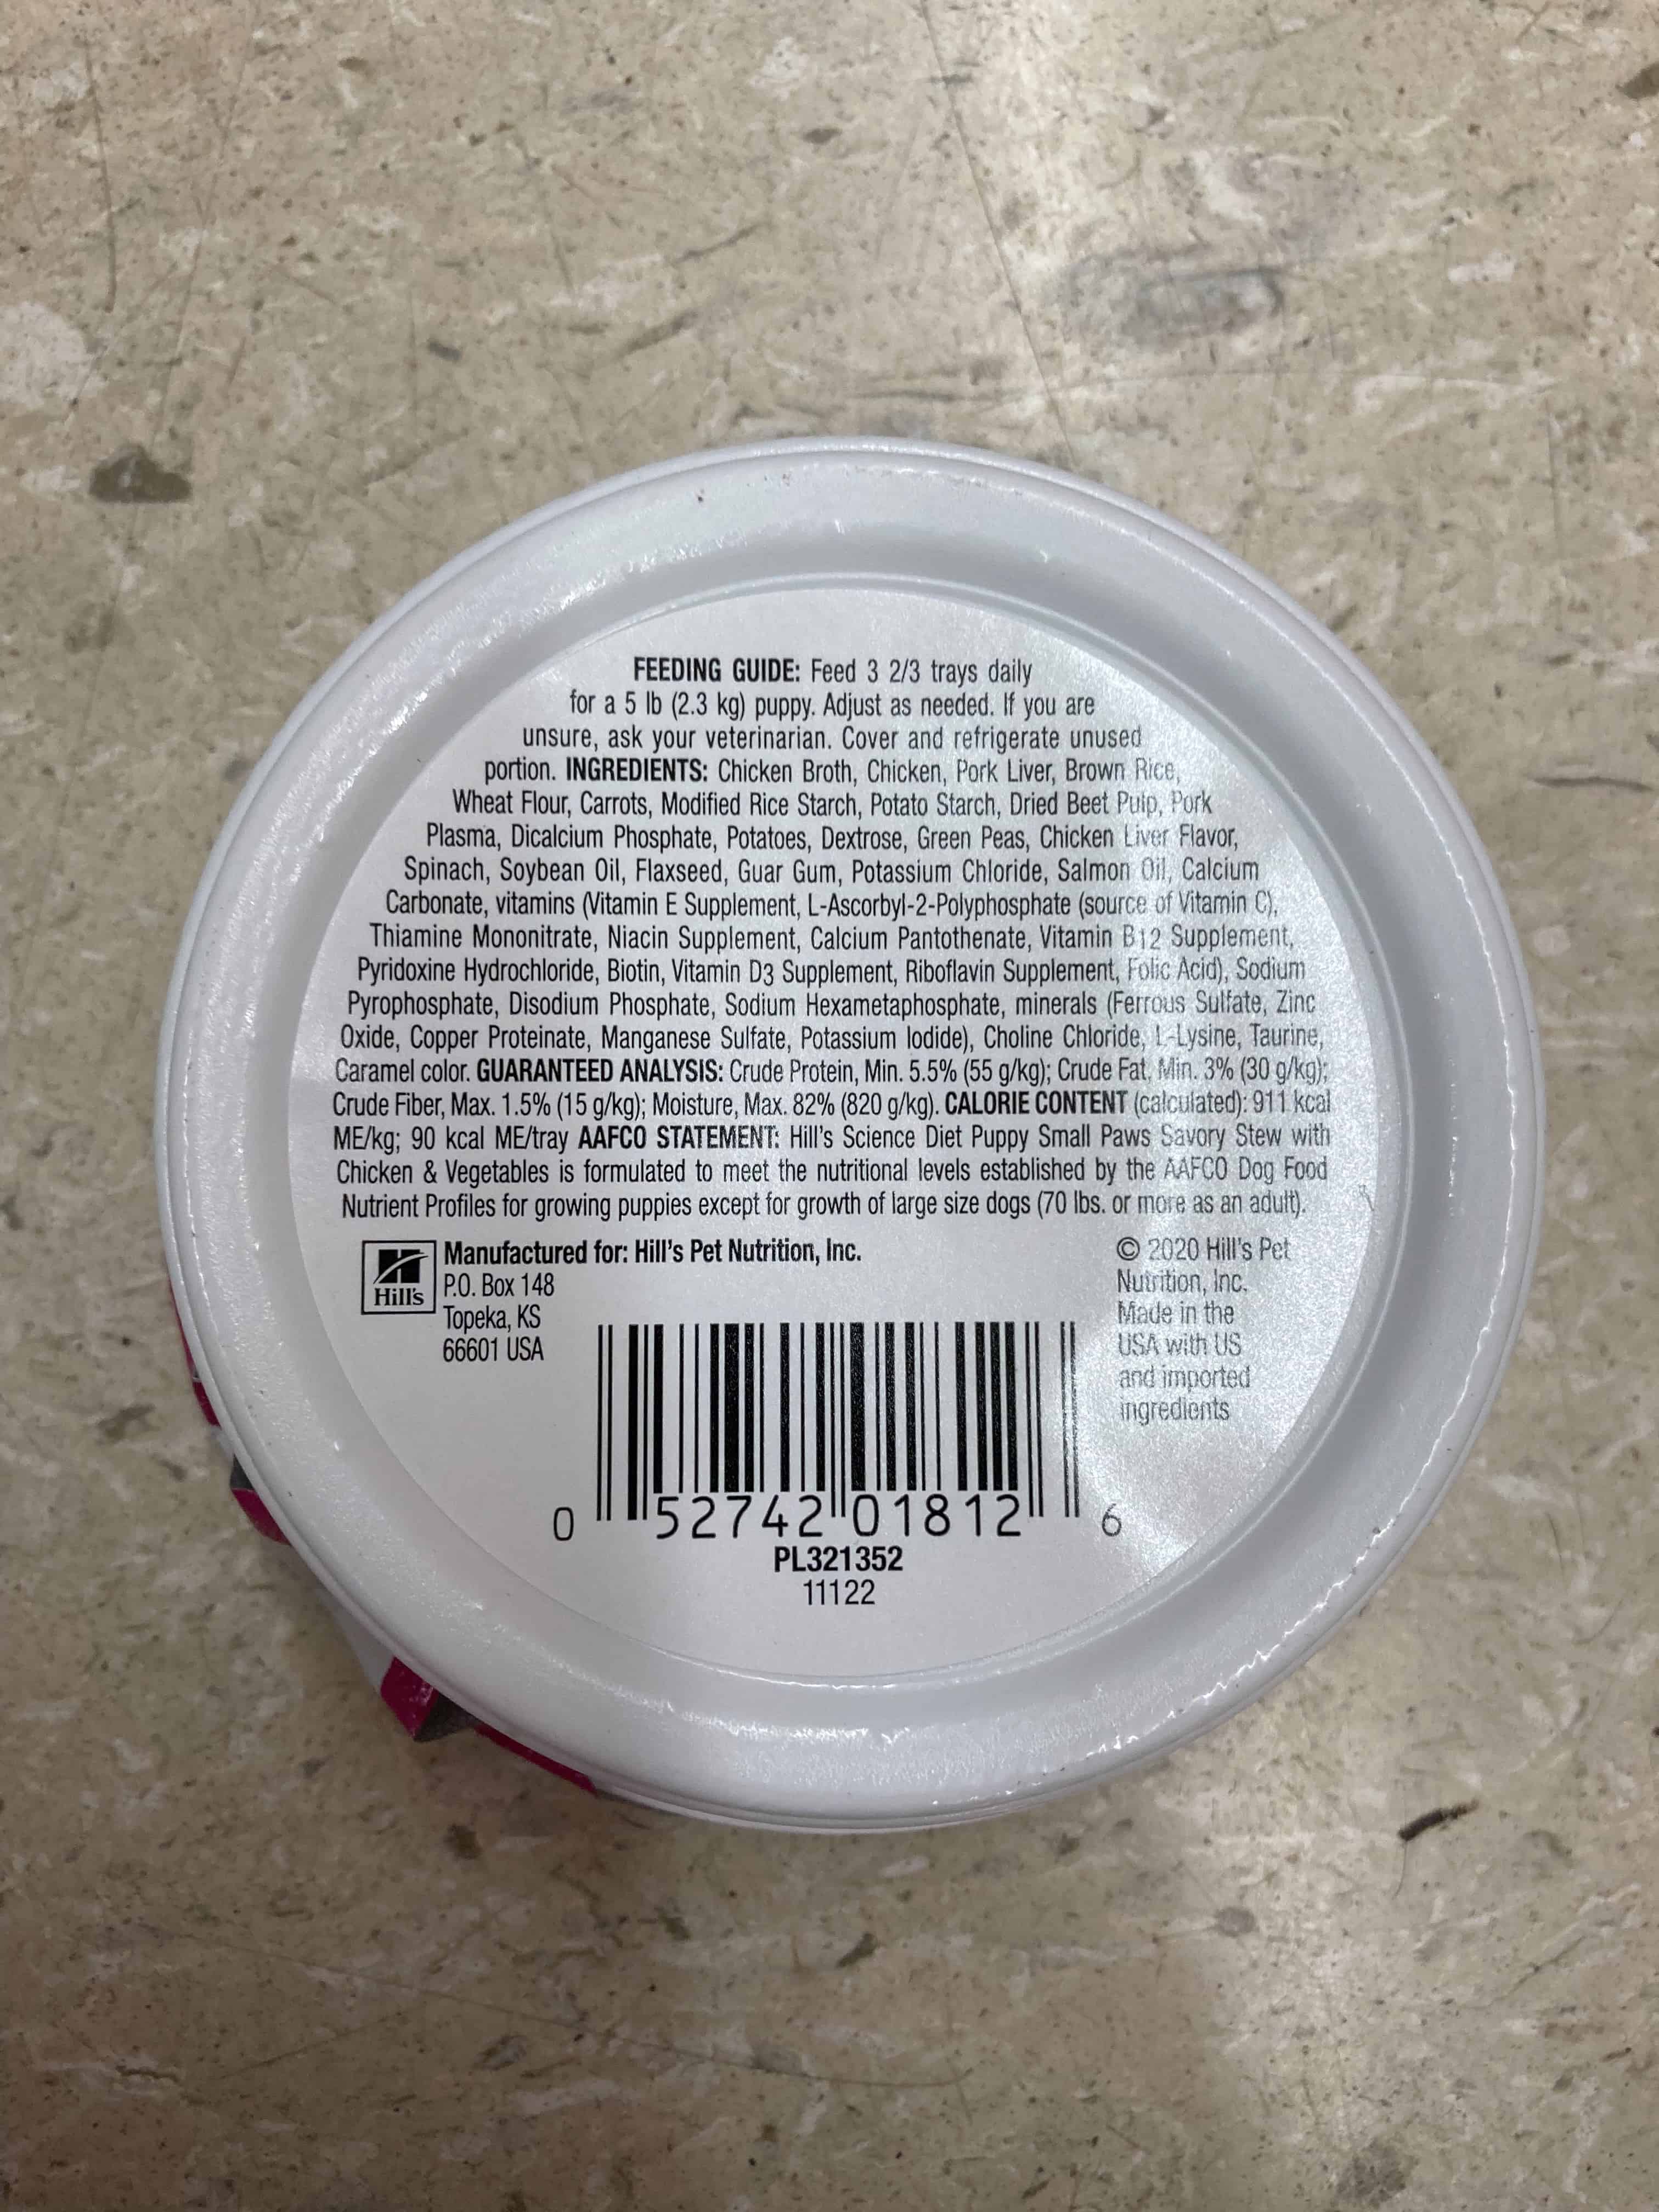 The ingredient label of Hill's Science Diet soft food